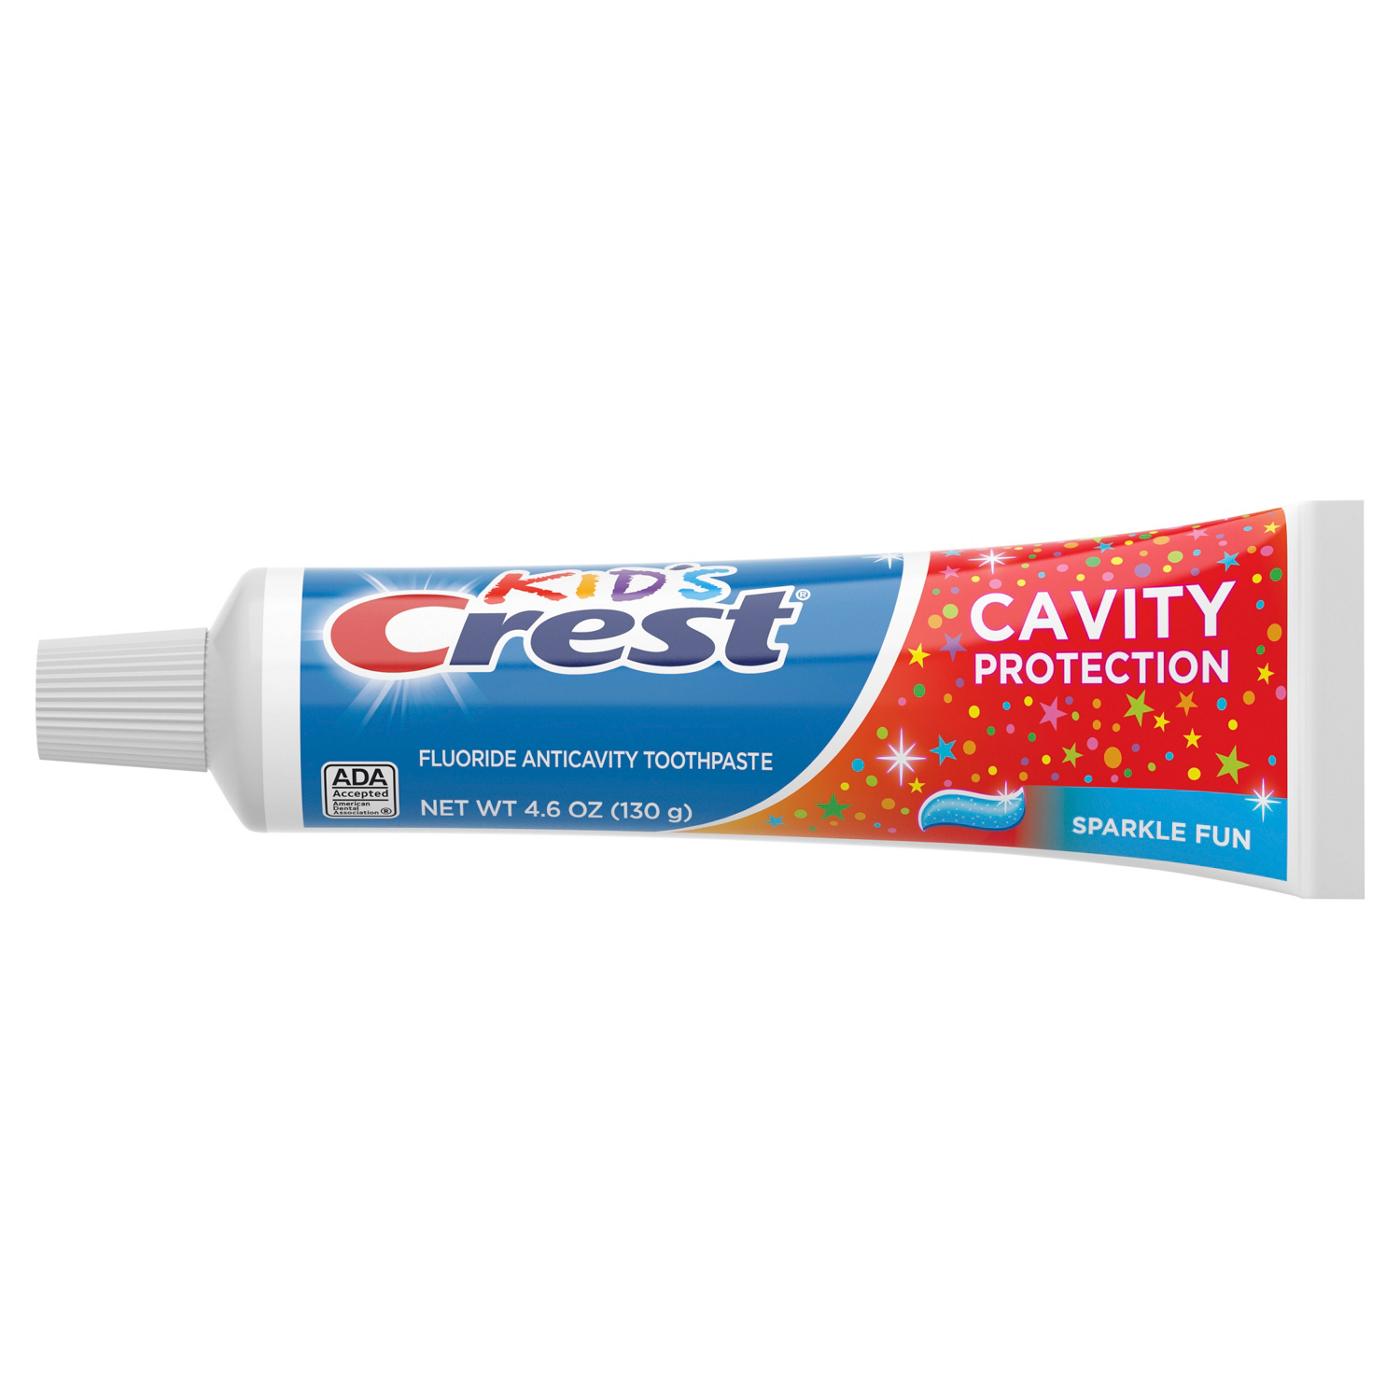 Crest Kid's Cavity Protection Toothpaste - Sparkle Fun; image 7 of 8